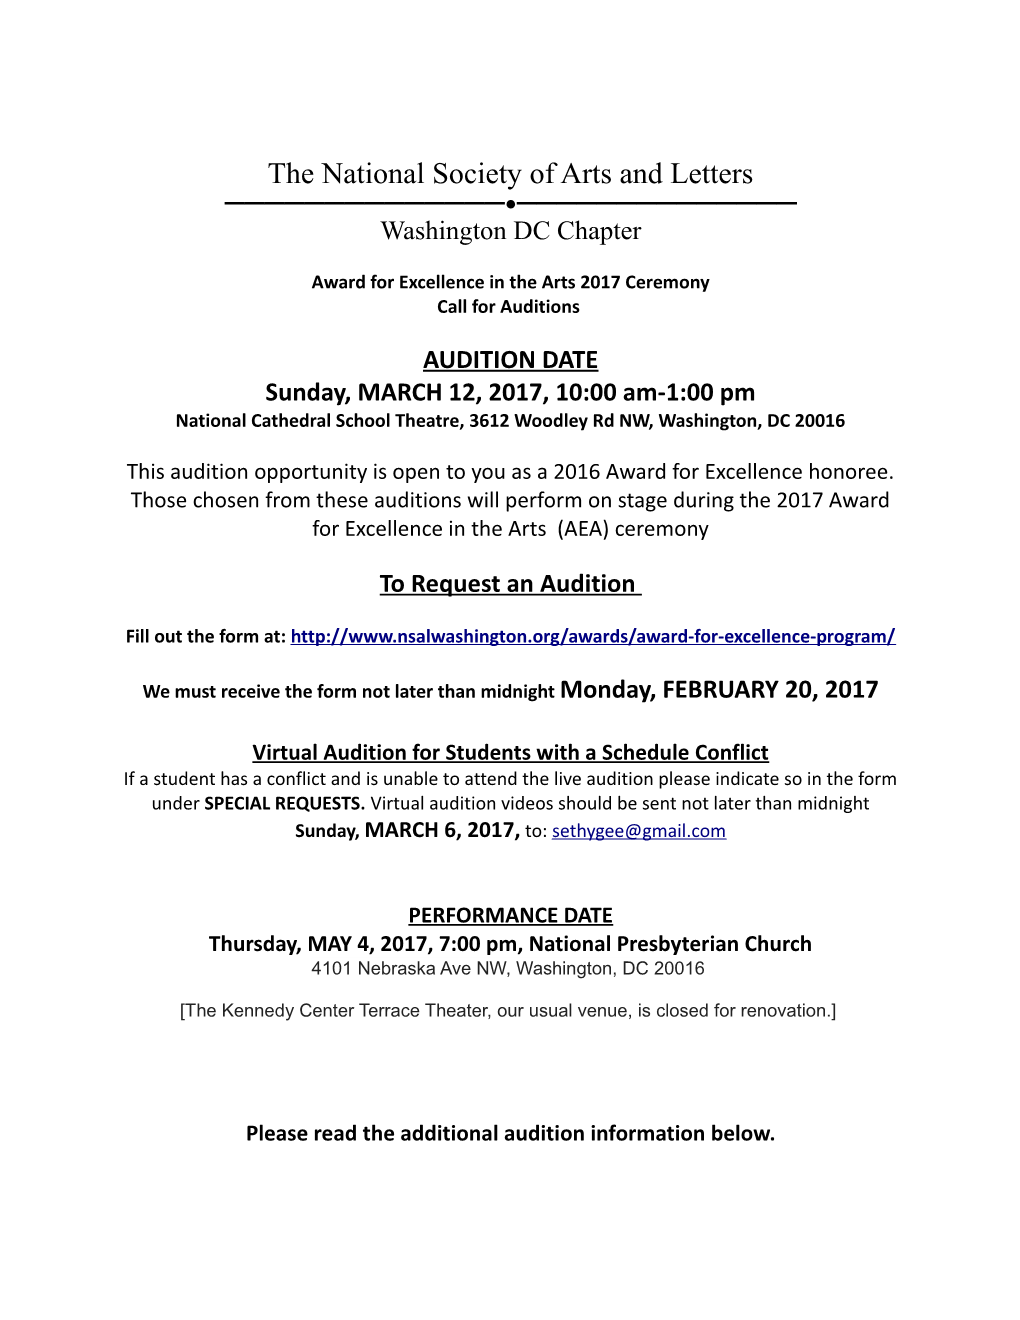 2013 Audition (Call-To-Audition) Notice Email at Maret School